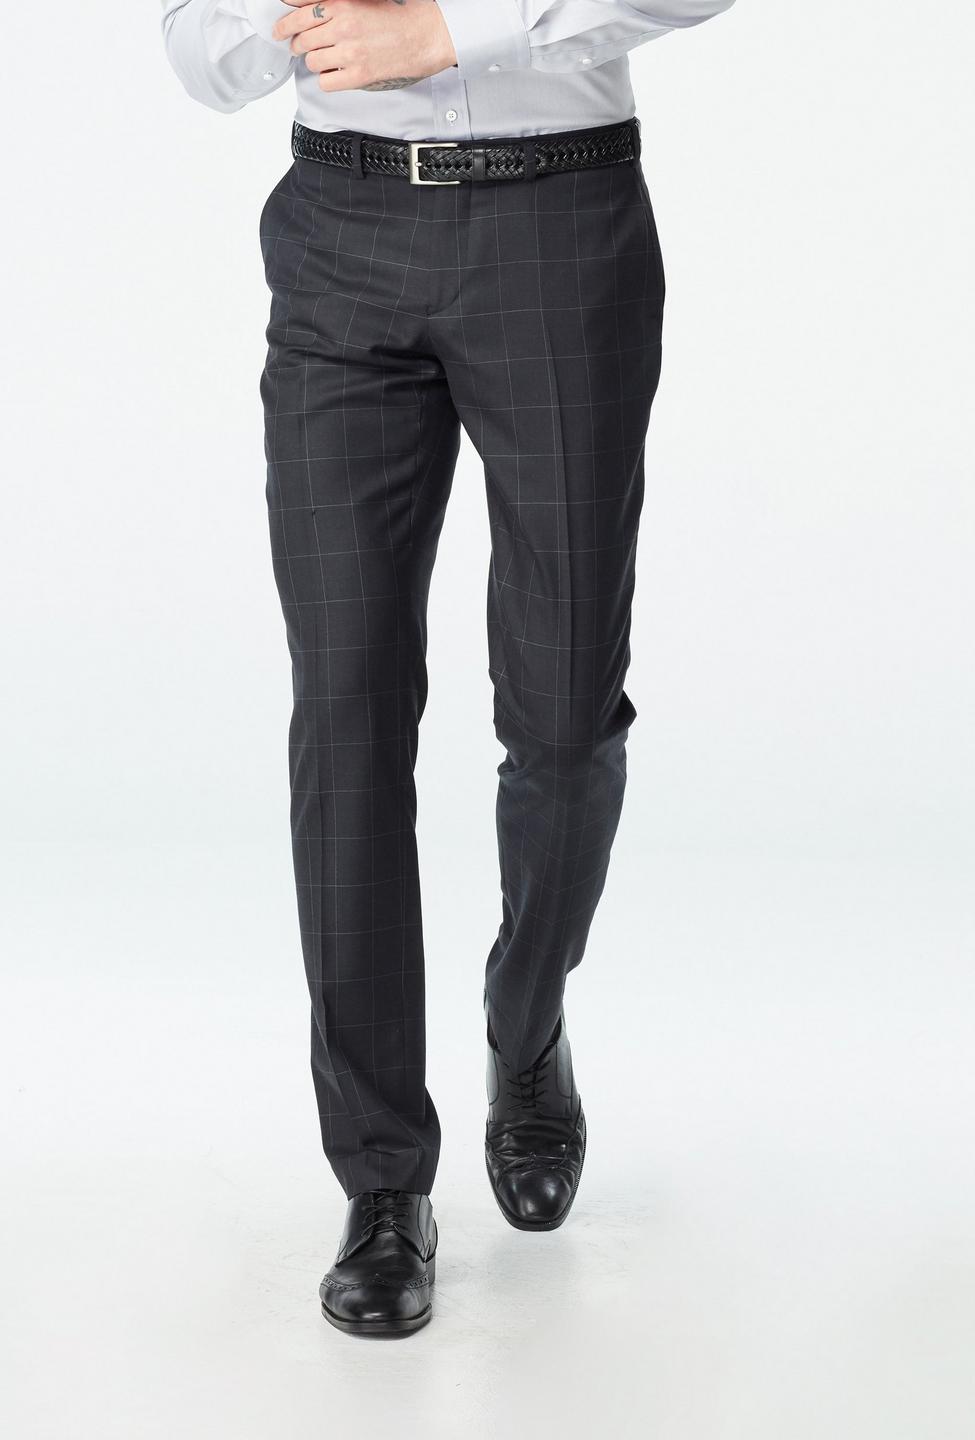 Blue and Burgundy pants - Checked Design from Indochino Collection